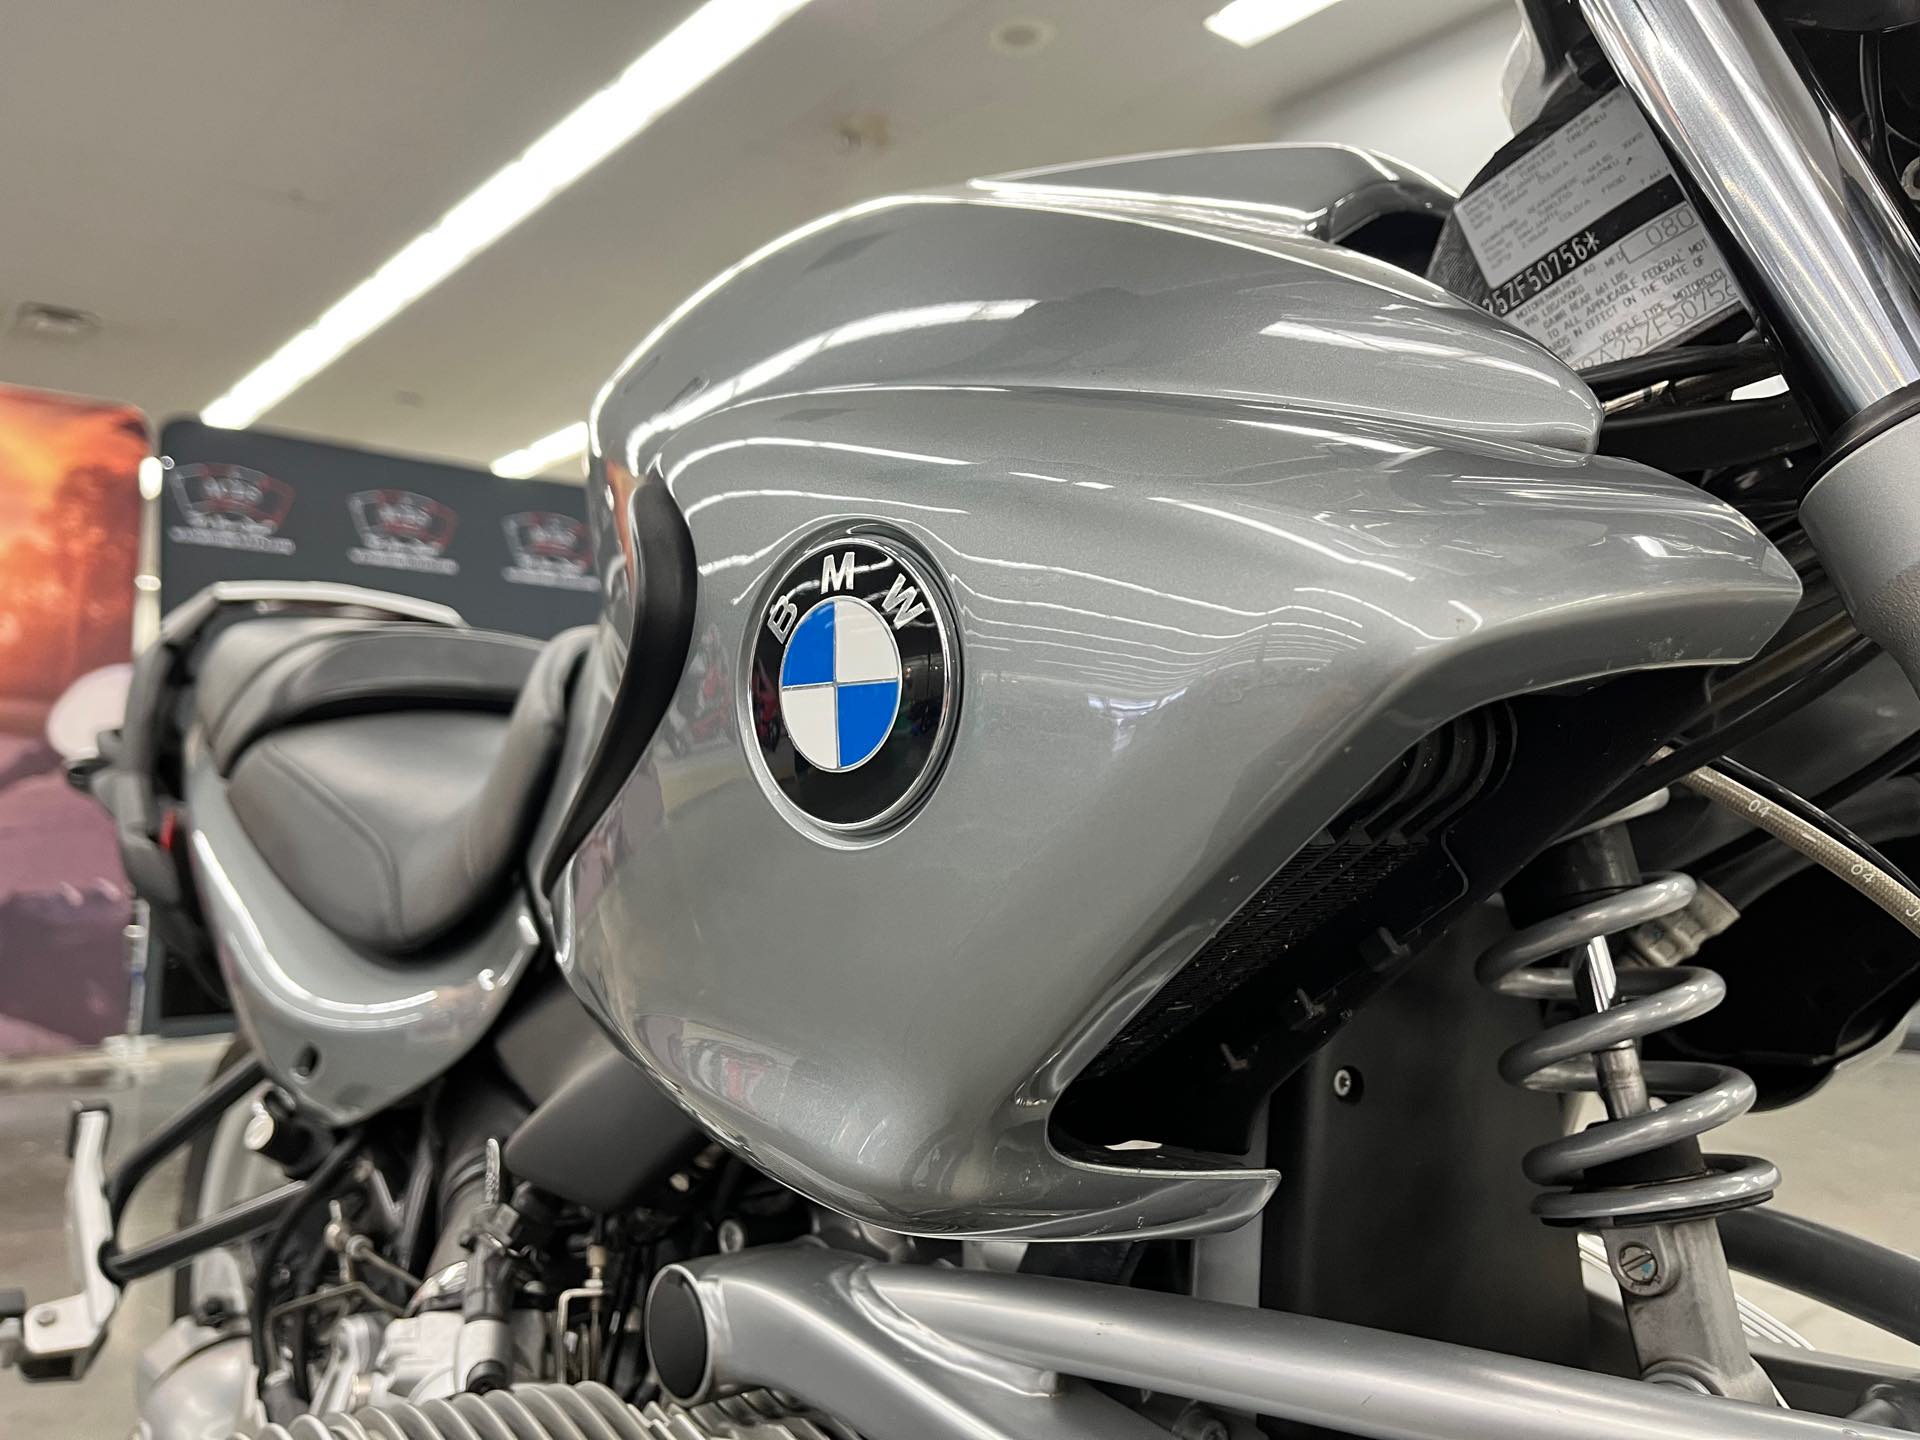 2005 BMW R 1150 R at Aces Motorcycles - Denver